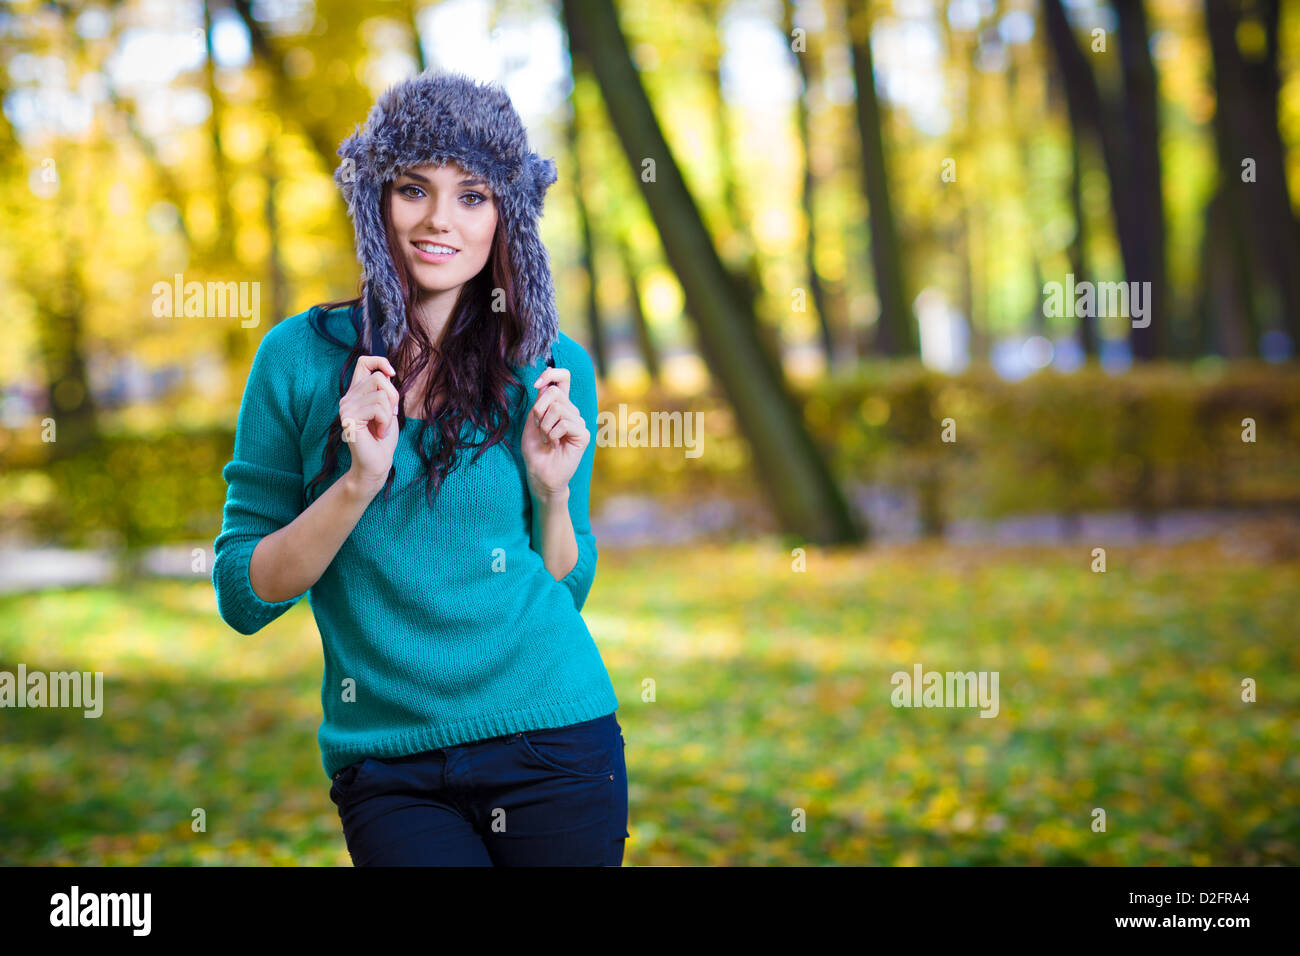 Young woman in Autumn park Stock Photo